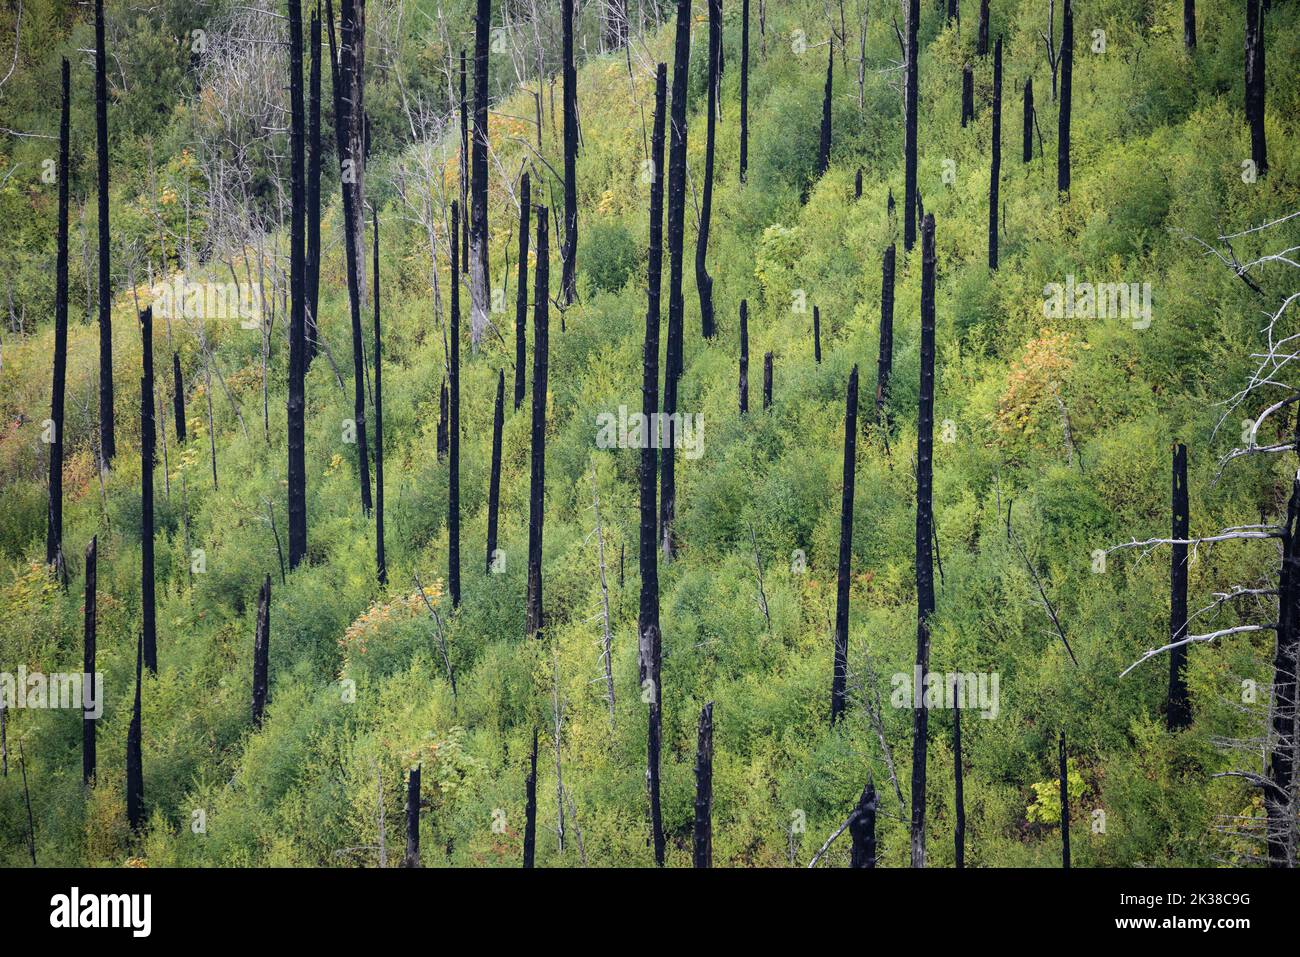 Contrasting landscape of burnt trees from the Eagle Creek fire over lush green new regrowth, Columbia River Gorge, Oregon Stock Photo